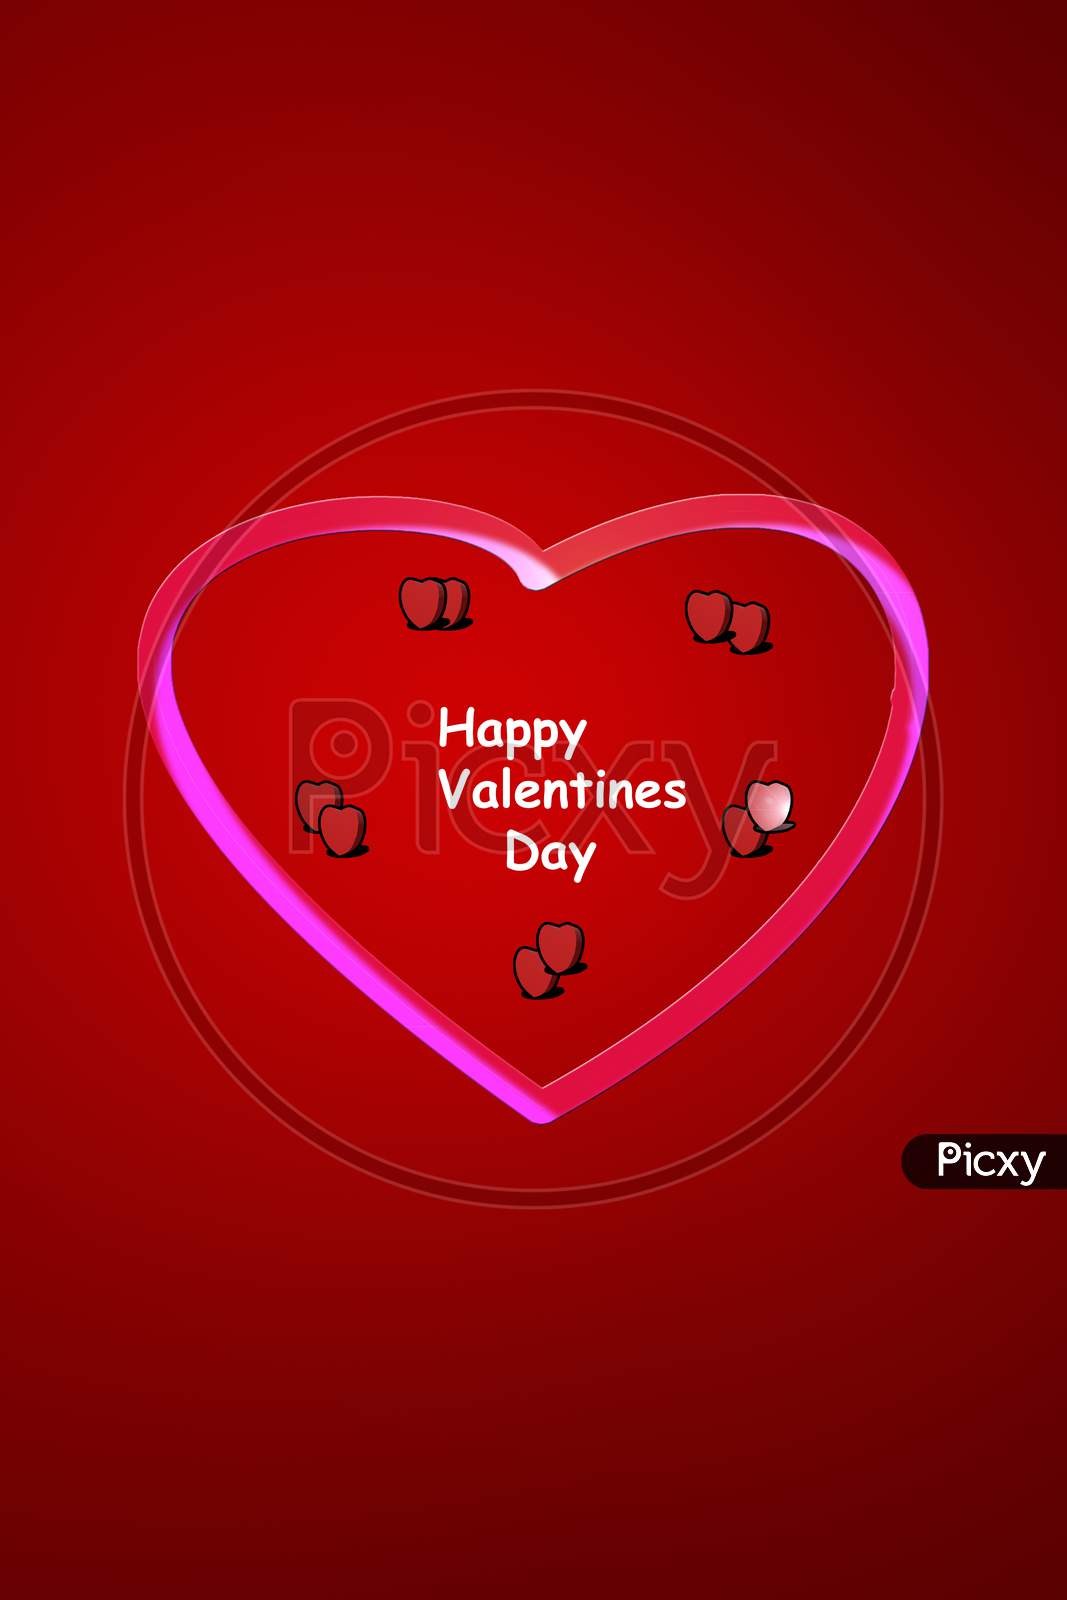 Happy Valentines Day Colourfull Heart Shape Romance Mobile Wallpaper